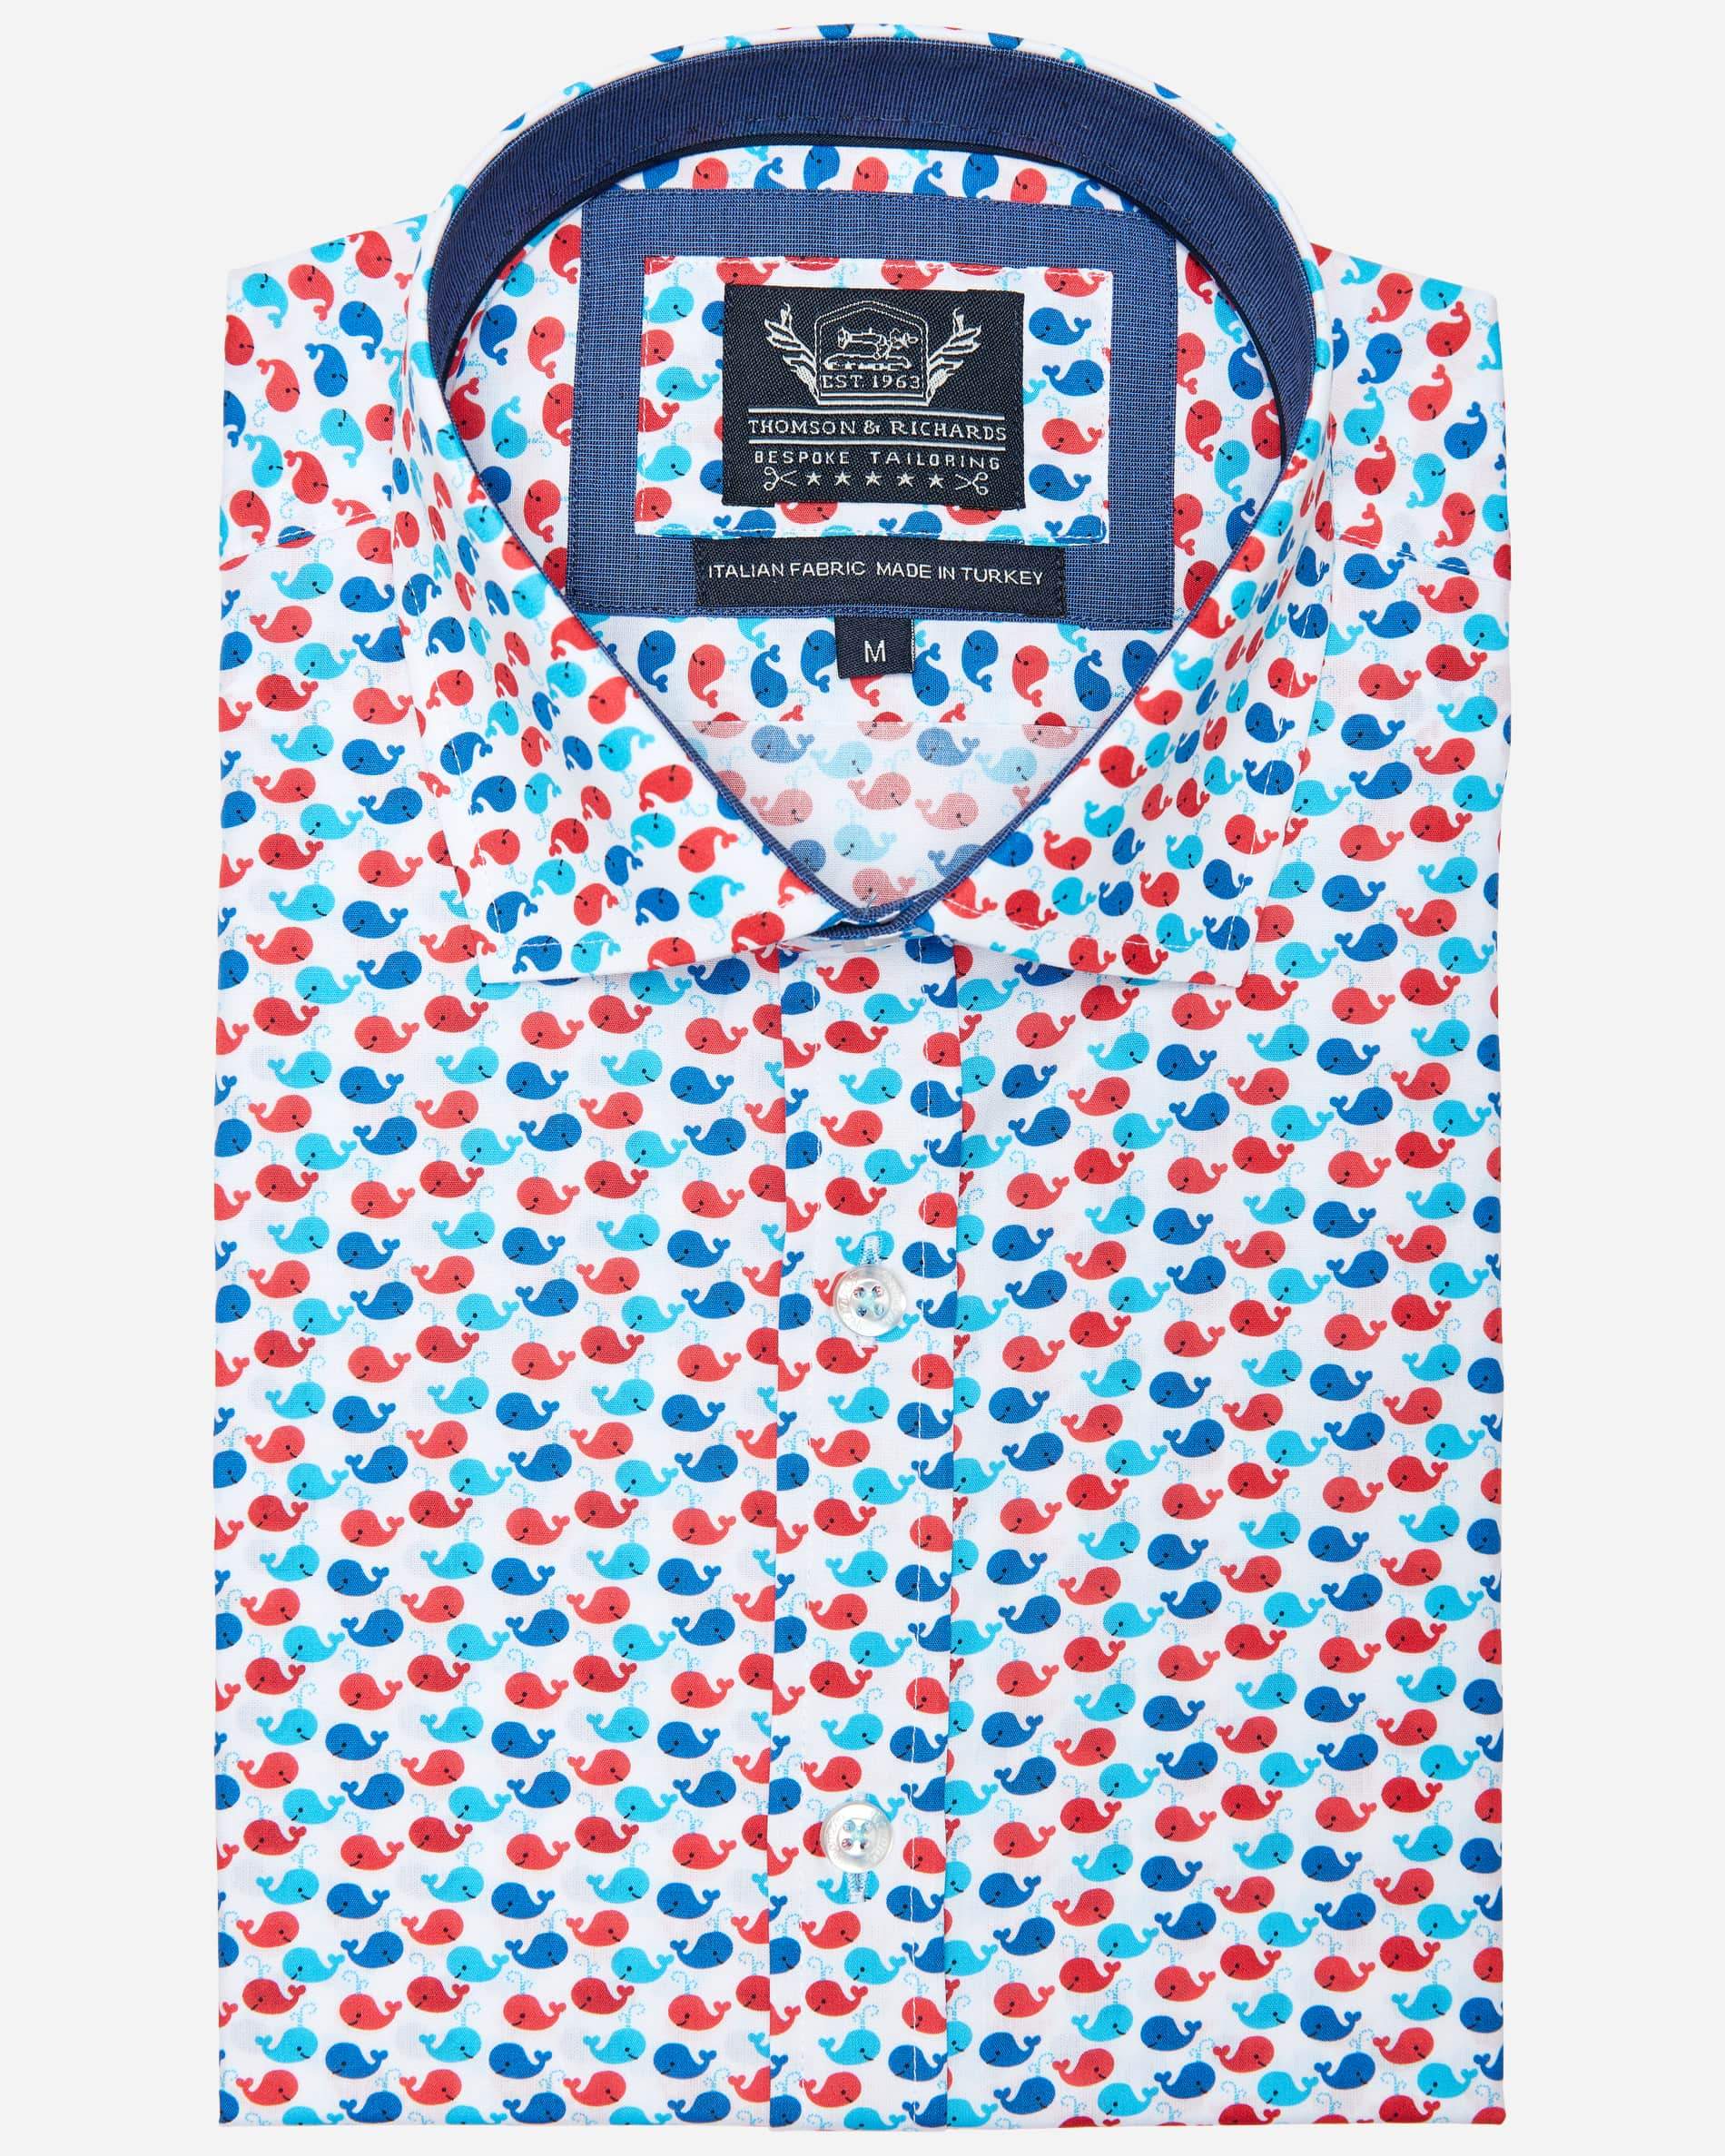 Free Willy S/S Shirt - Men's Short Sleeve Shirts at Menzclub